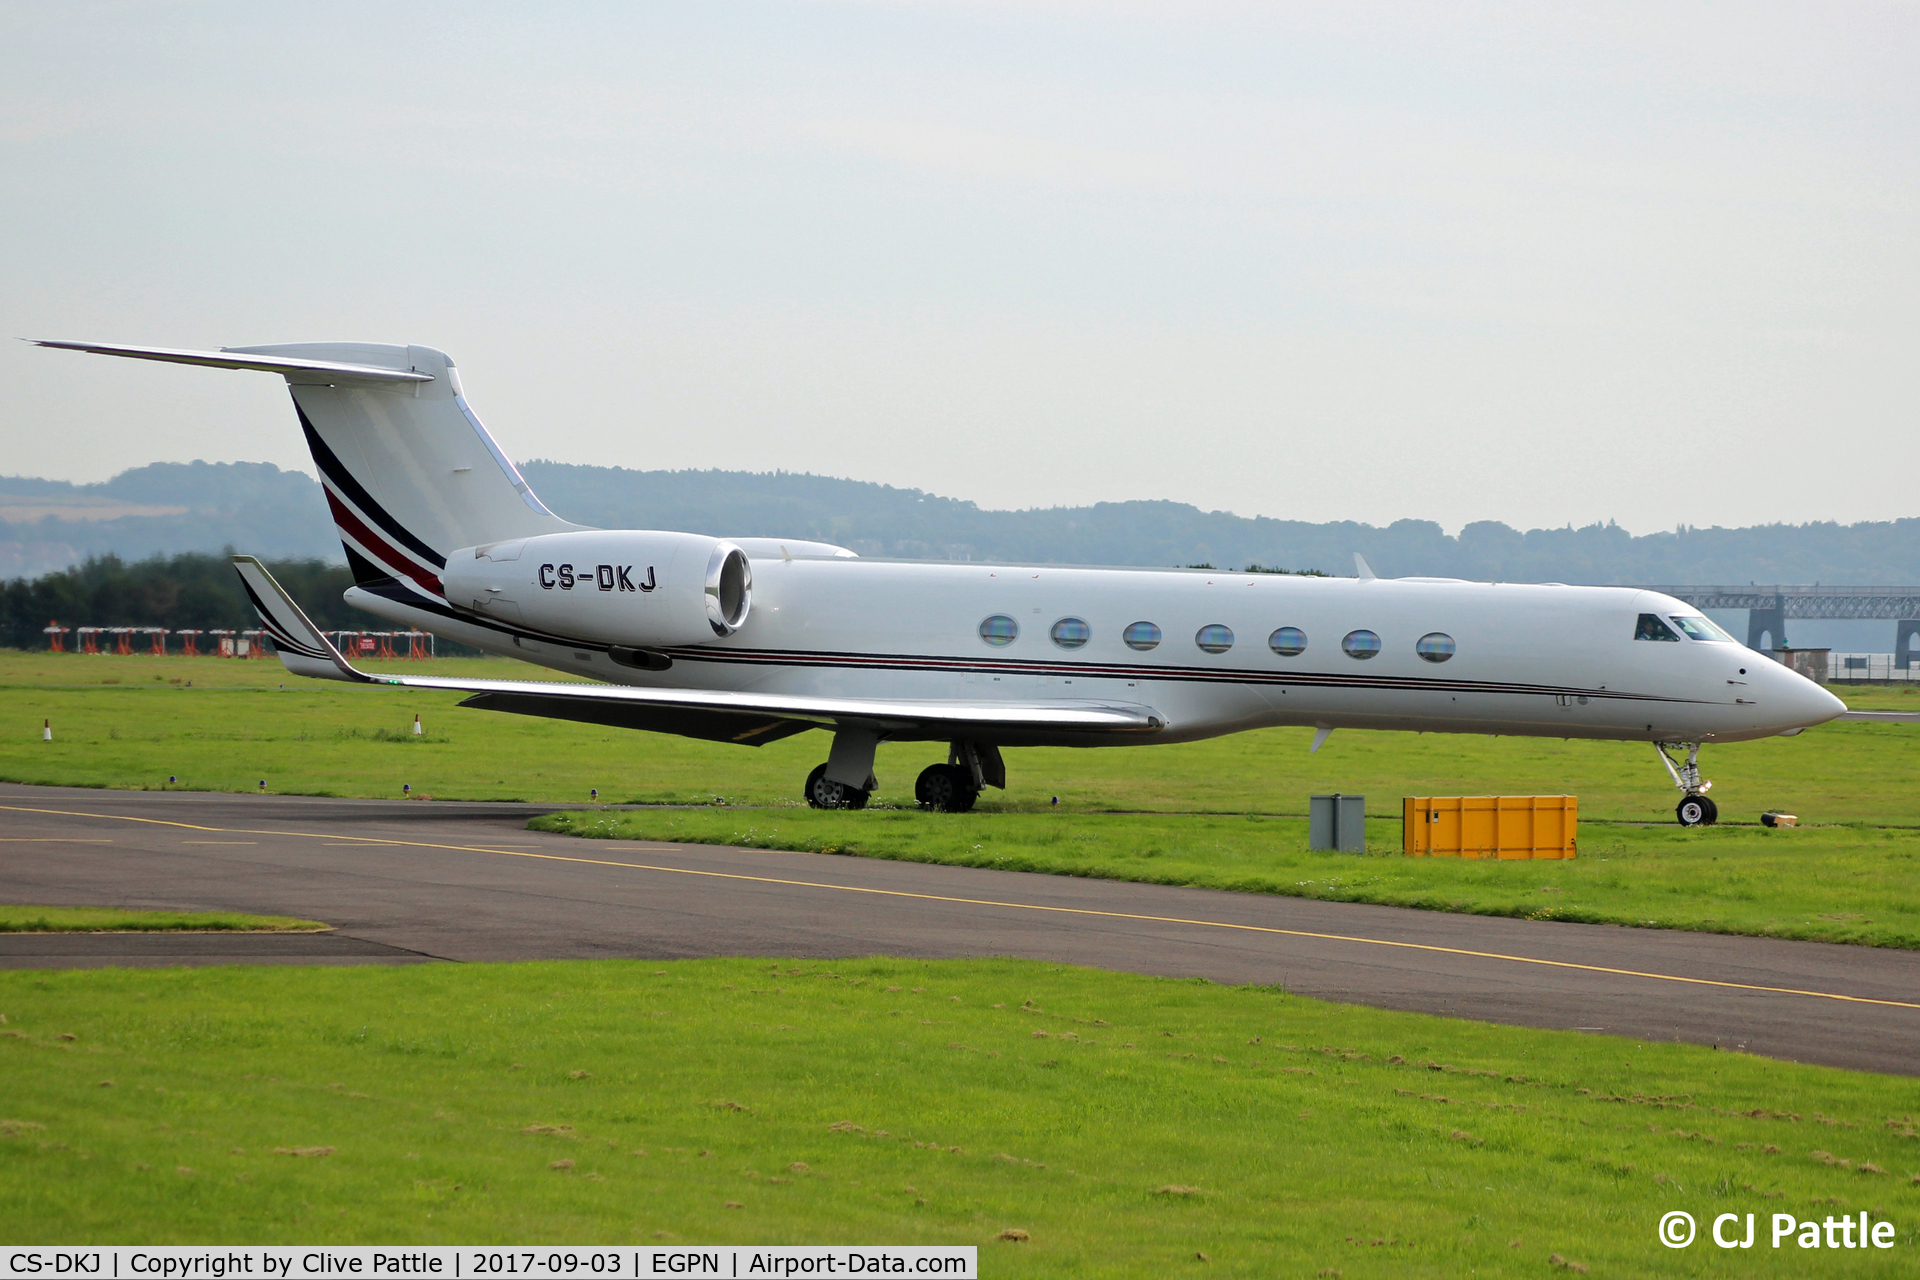 CS-DKJ, 2008 Gulfstream Aerospace V-SP G550 C/N 5174, Taxy out at Dundee